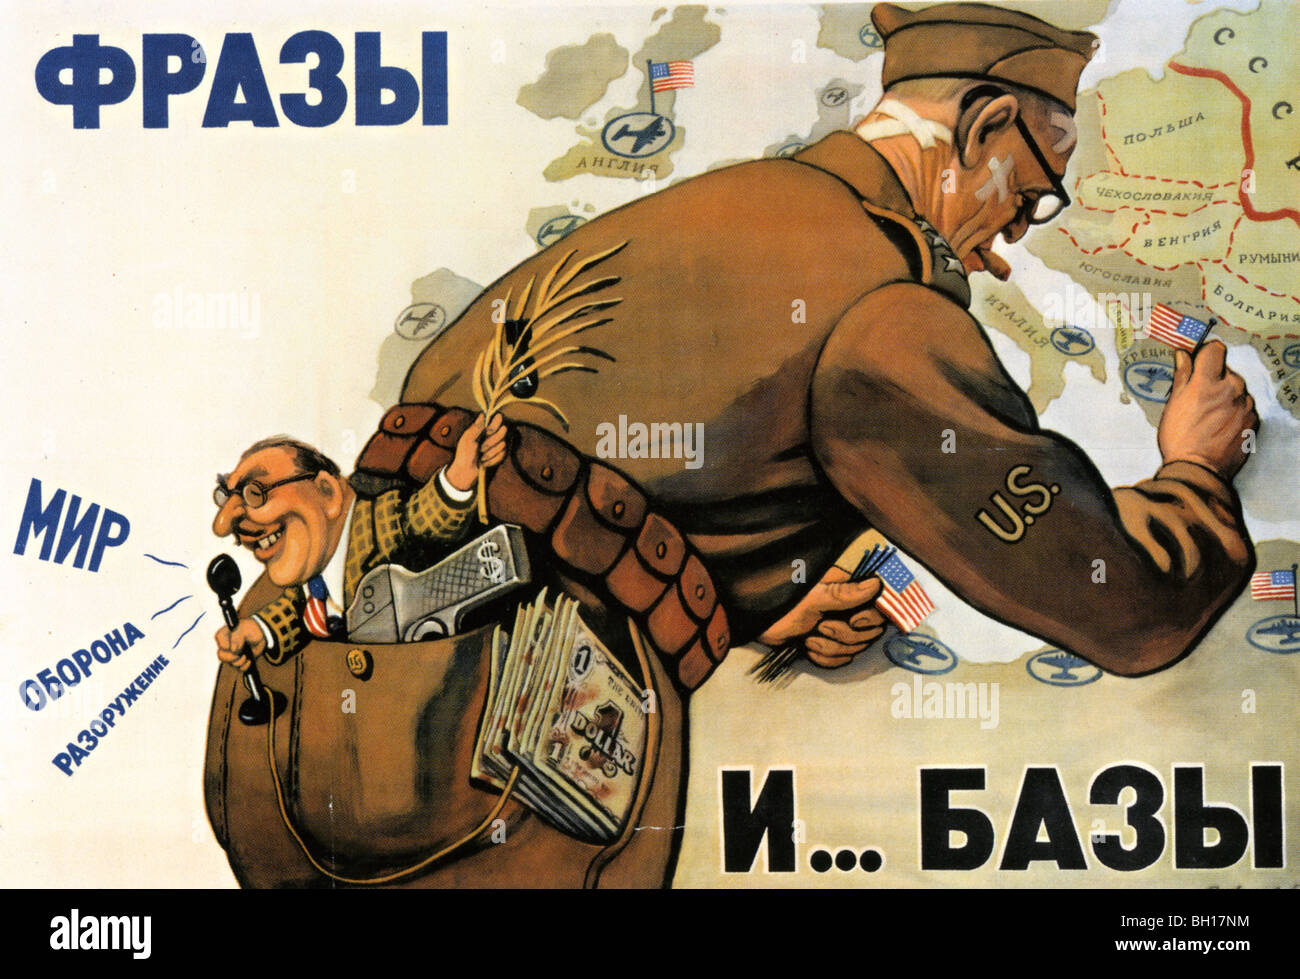 SOVIET UNION poster from about 1952 which accuses America of talking Peace while setting up military bass near Russia Stock Photo